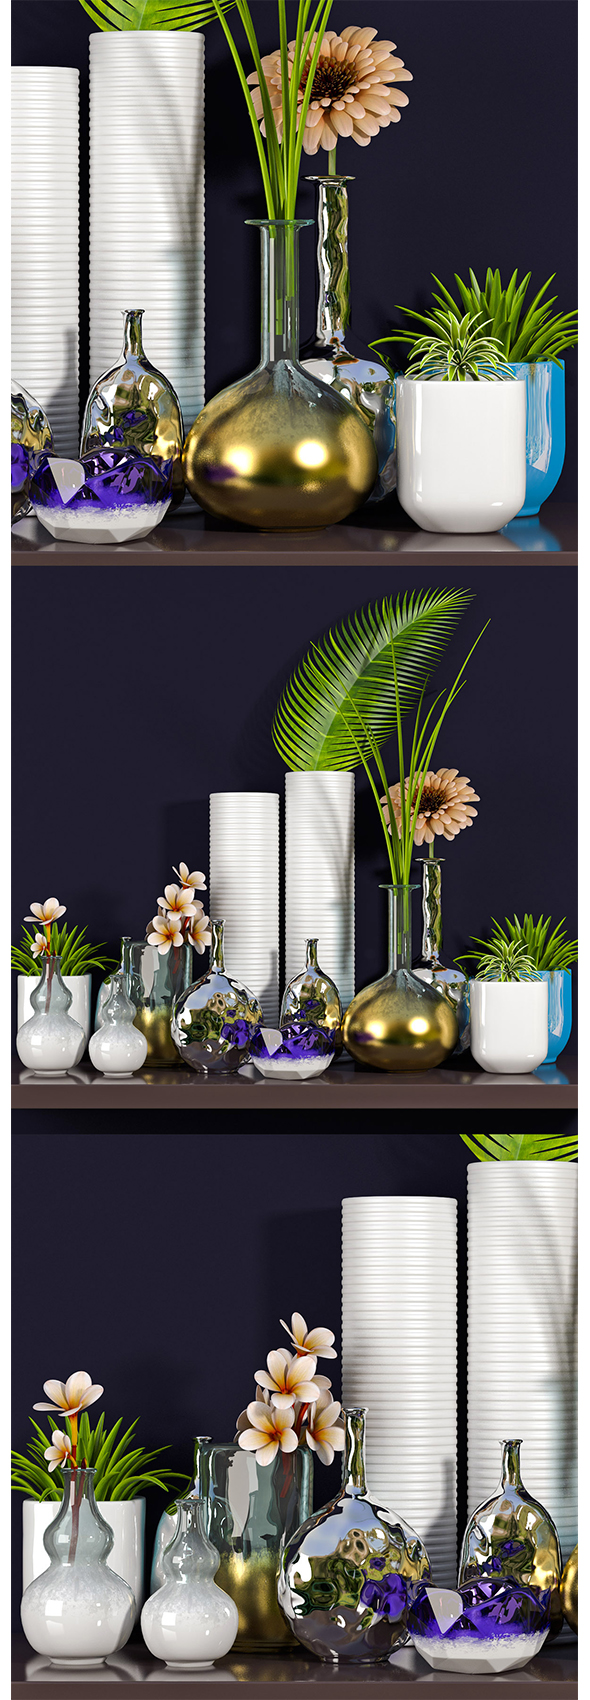 Vases Collection - 3Docean 32441200